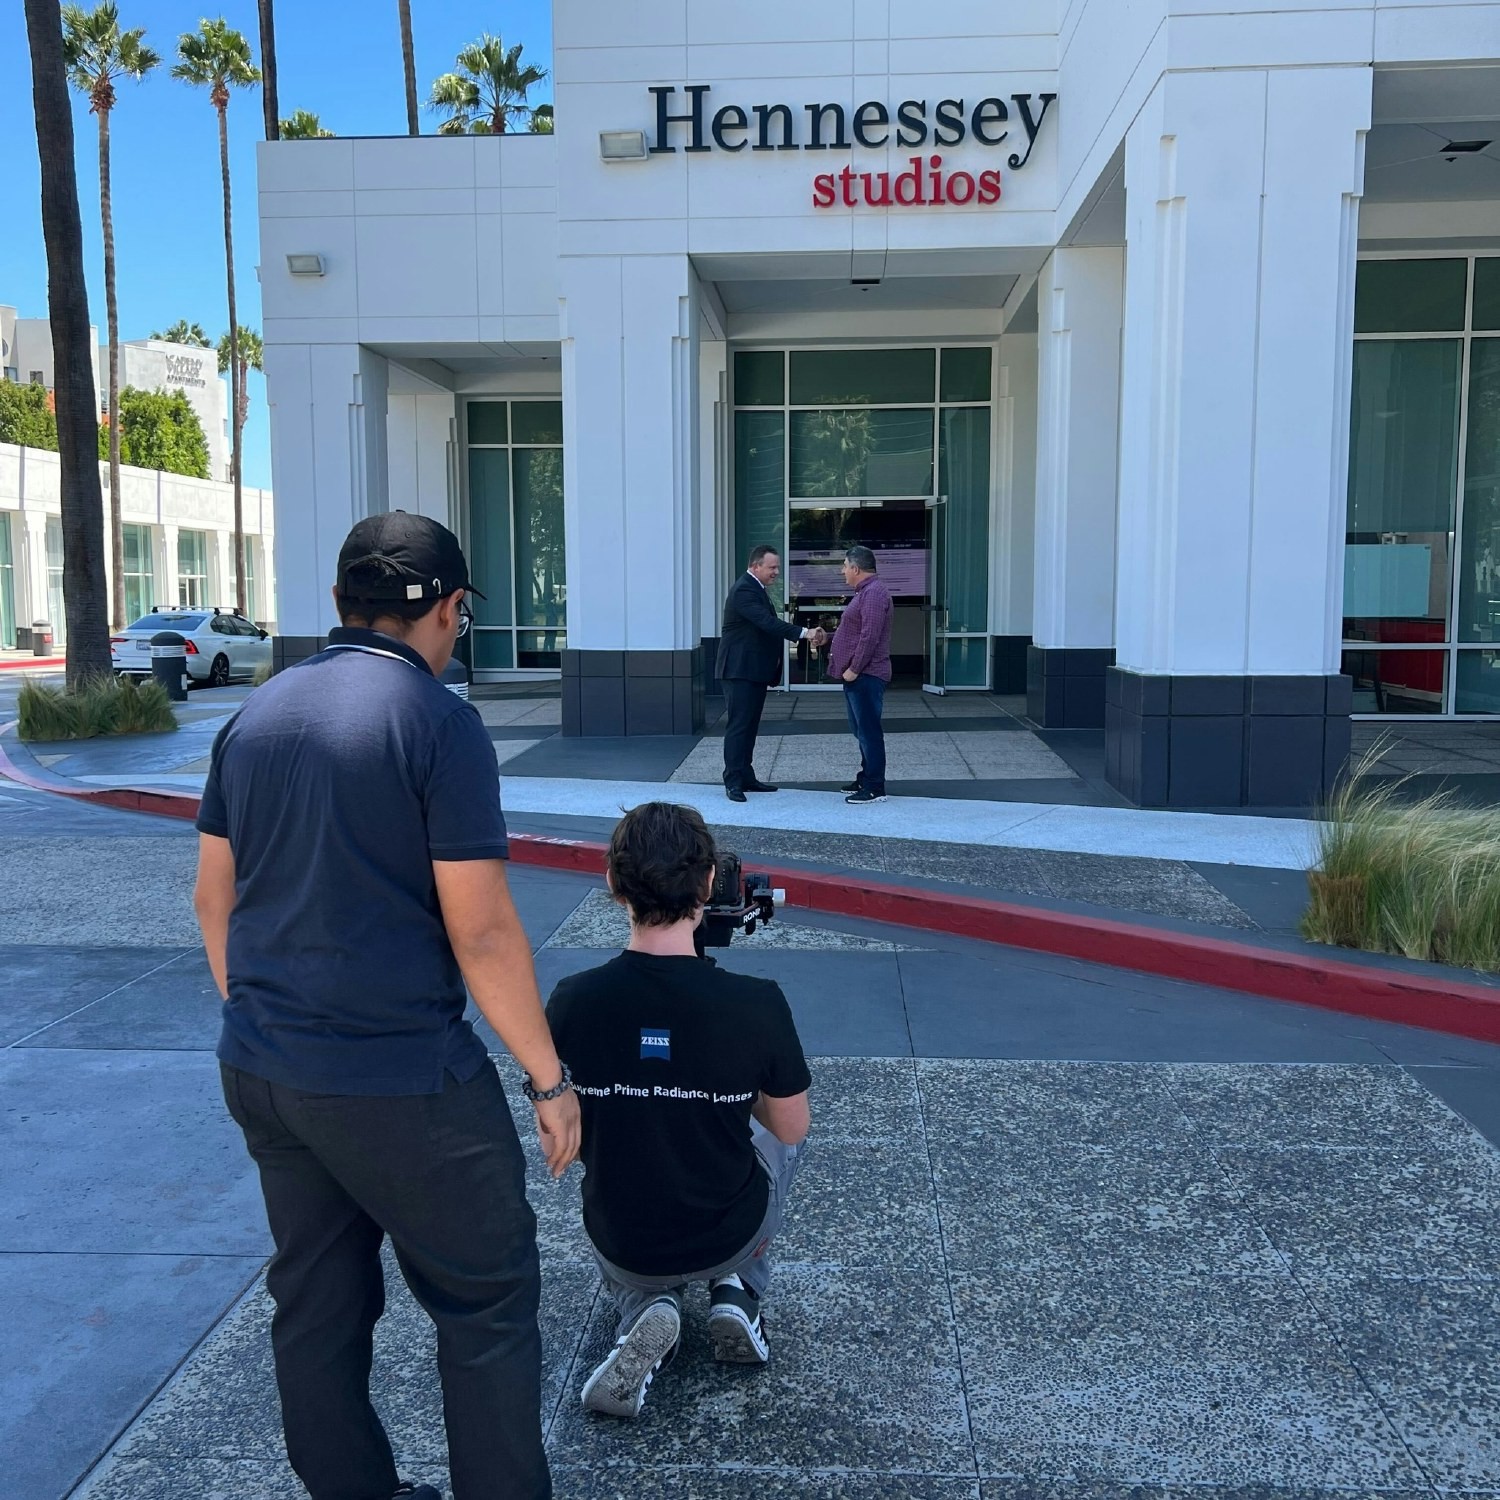 Jason Hennessey and The Simmrin Law Group meet to film at Hennessey Studios